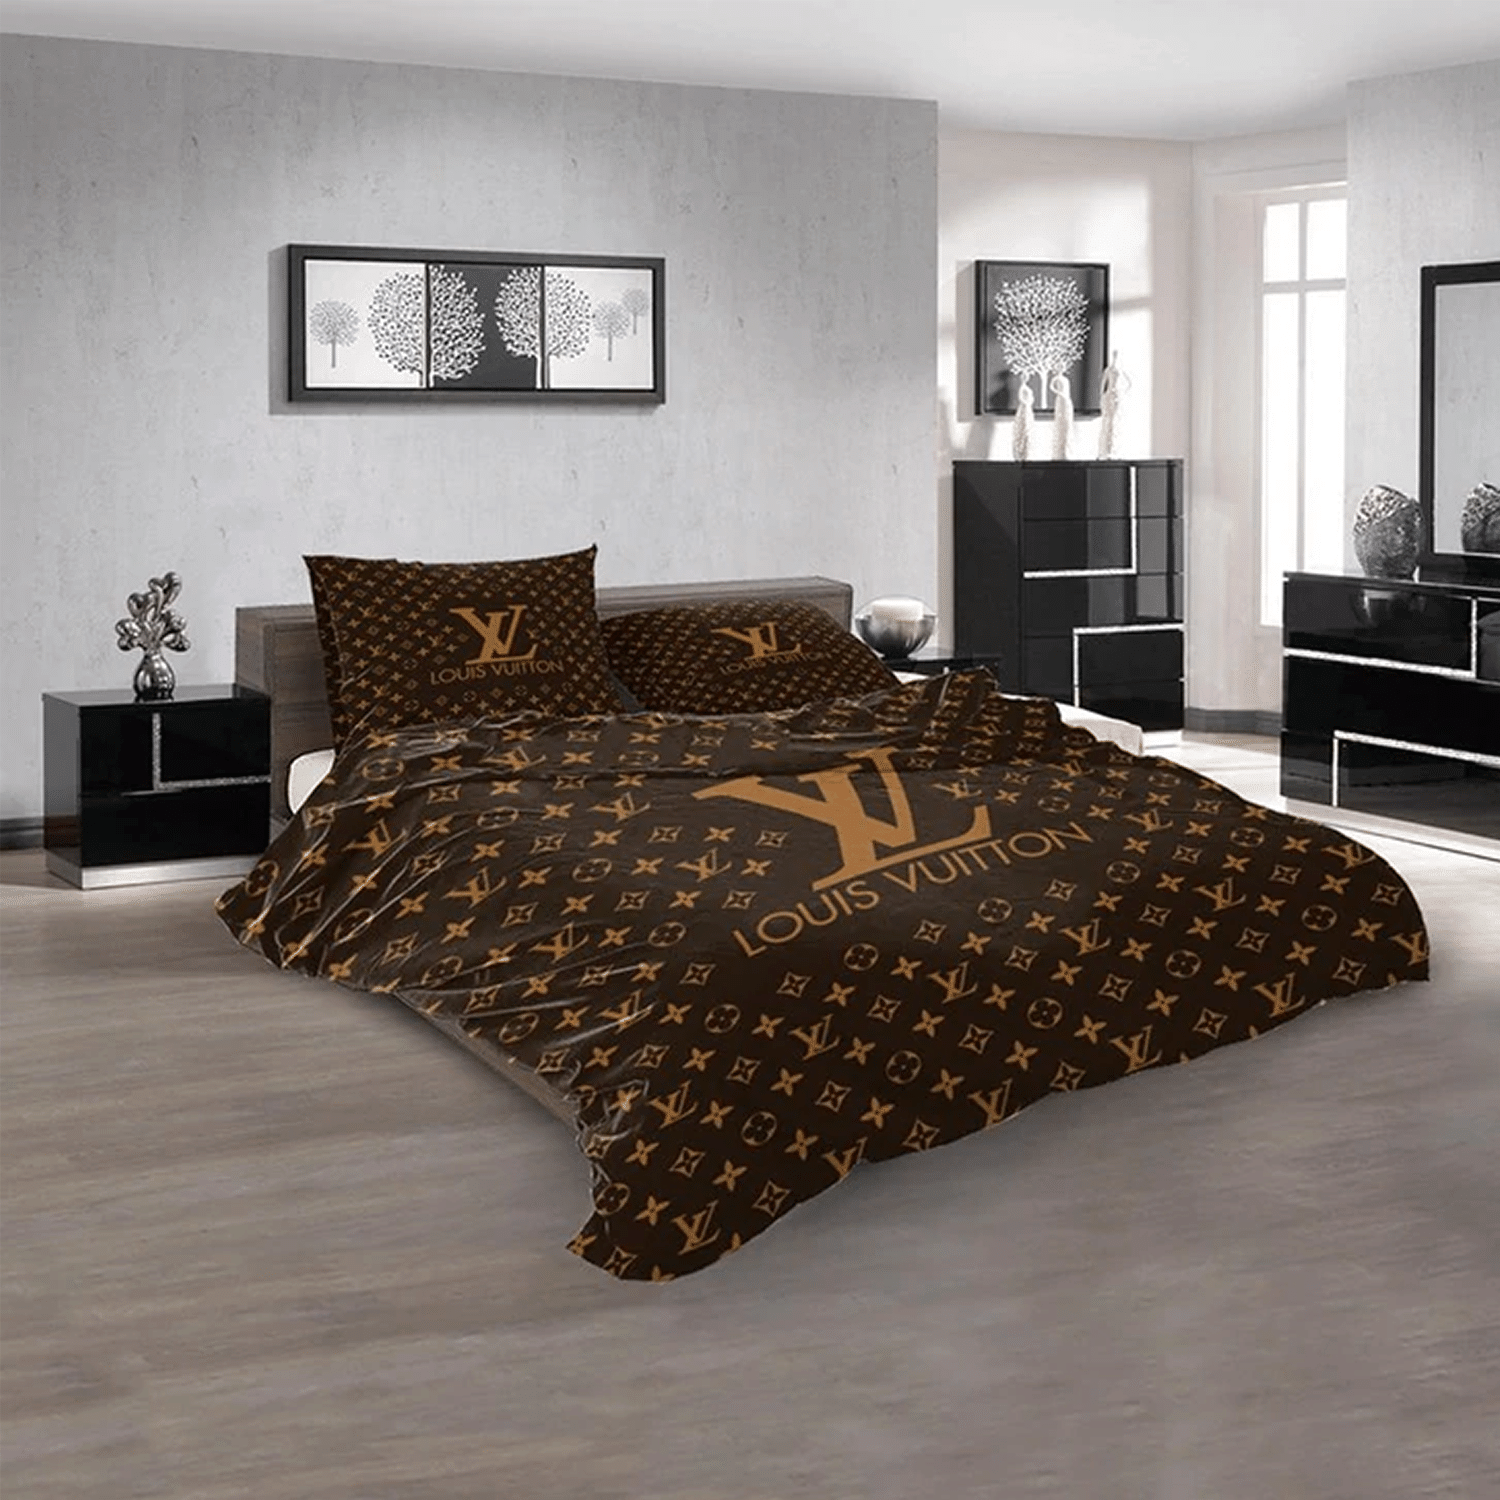 Let me show you about some luxury brand bedding set 2022 70